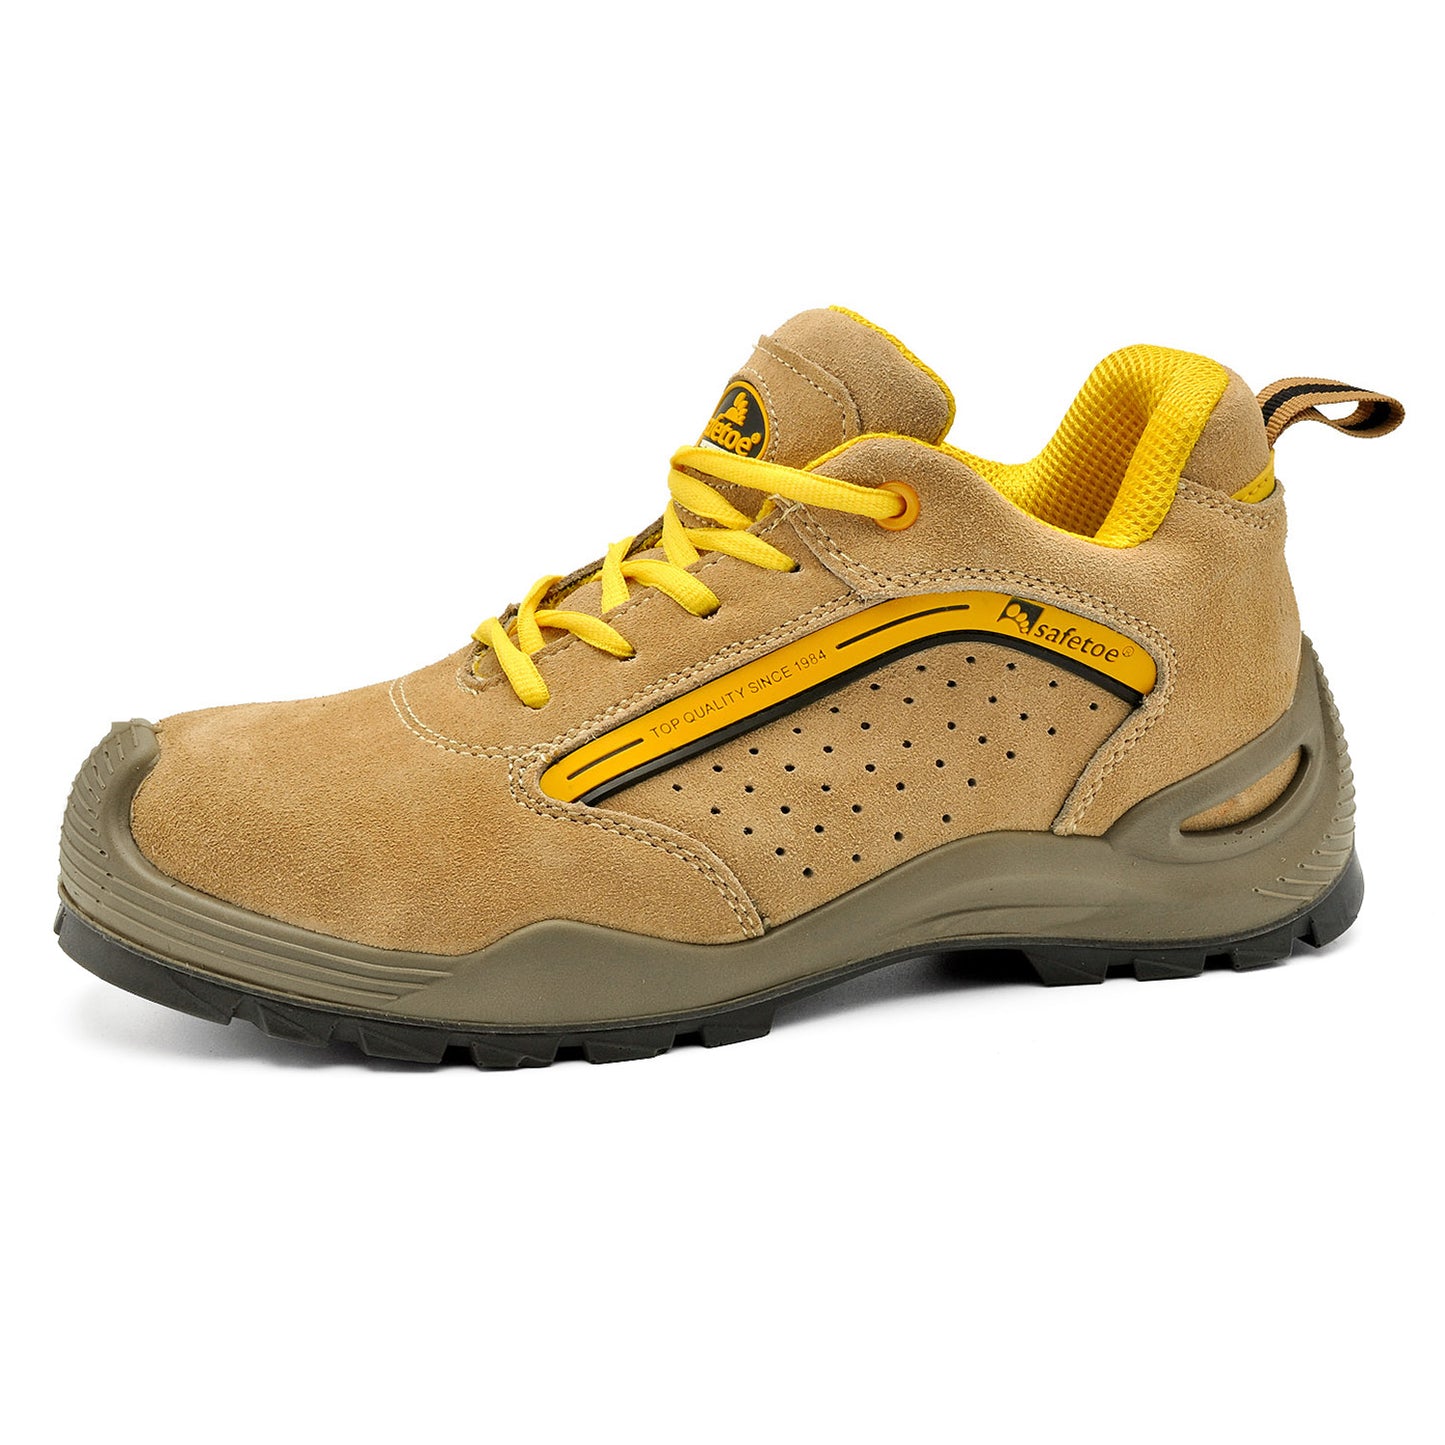 Stratus Safety Shoes Steel Toe